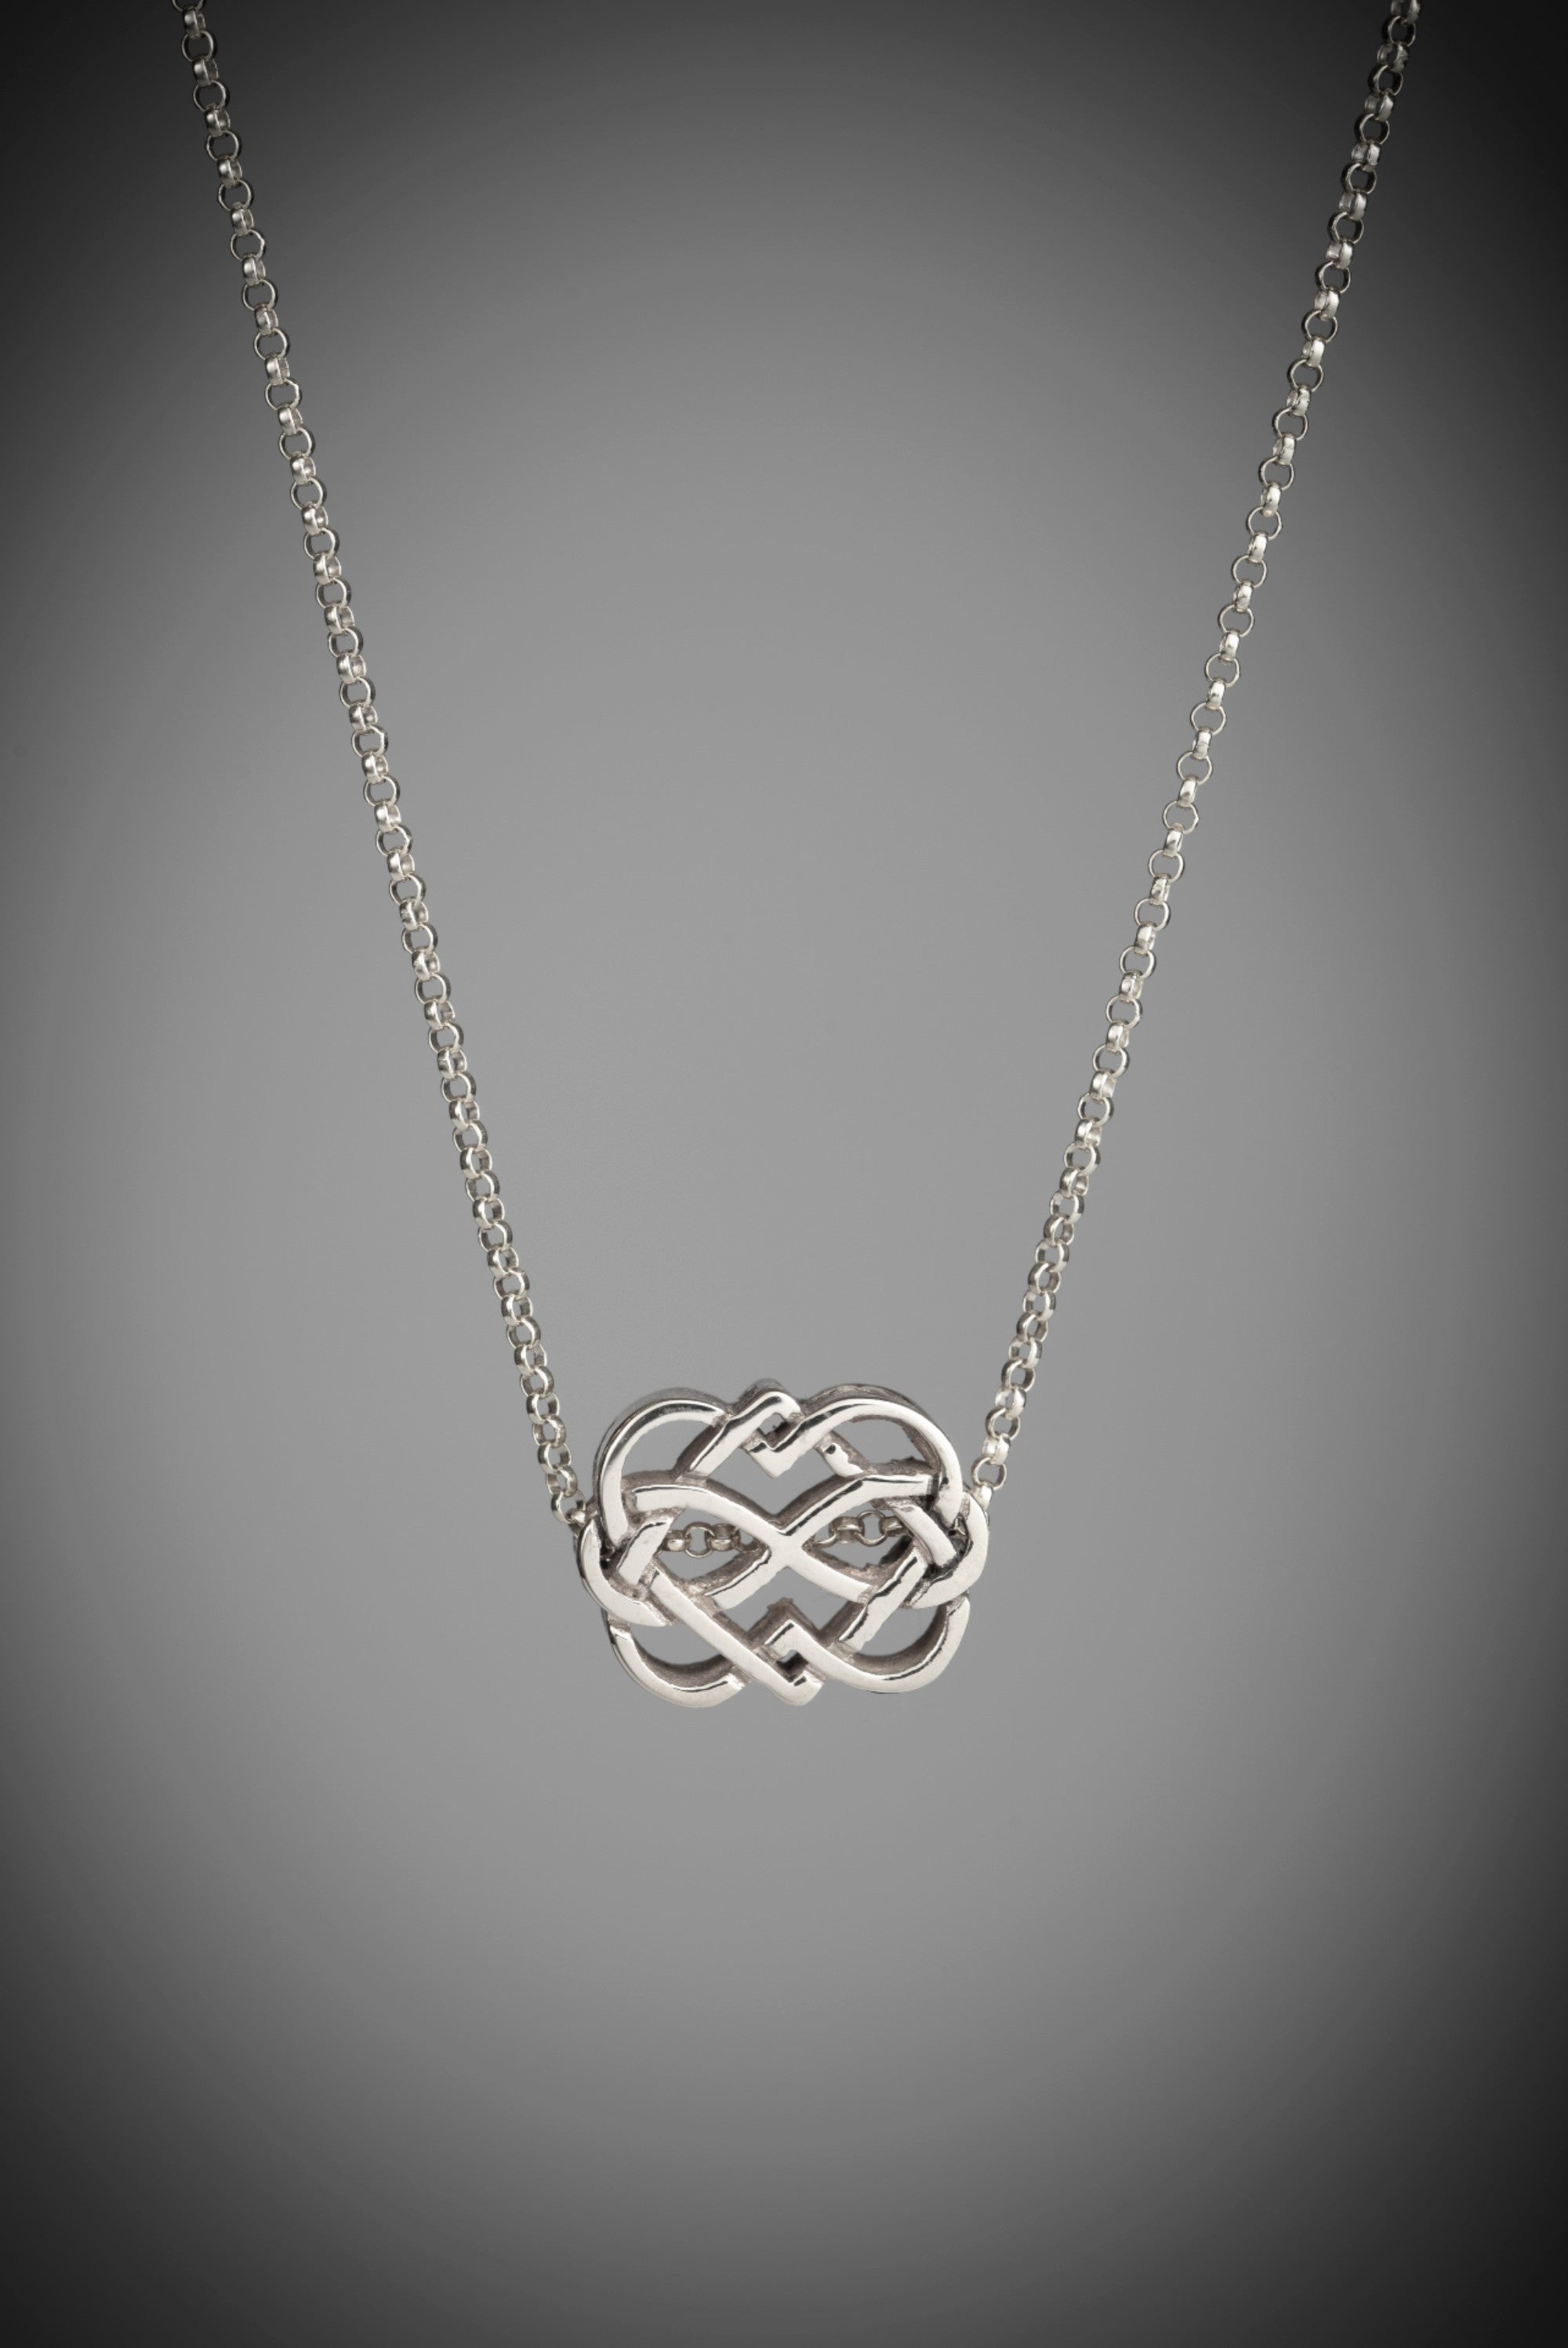 Celtic Trinity Knot Medallion Necklace with White Cubic Zirconia